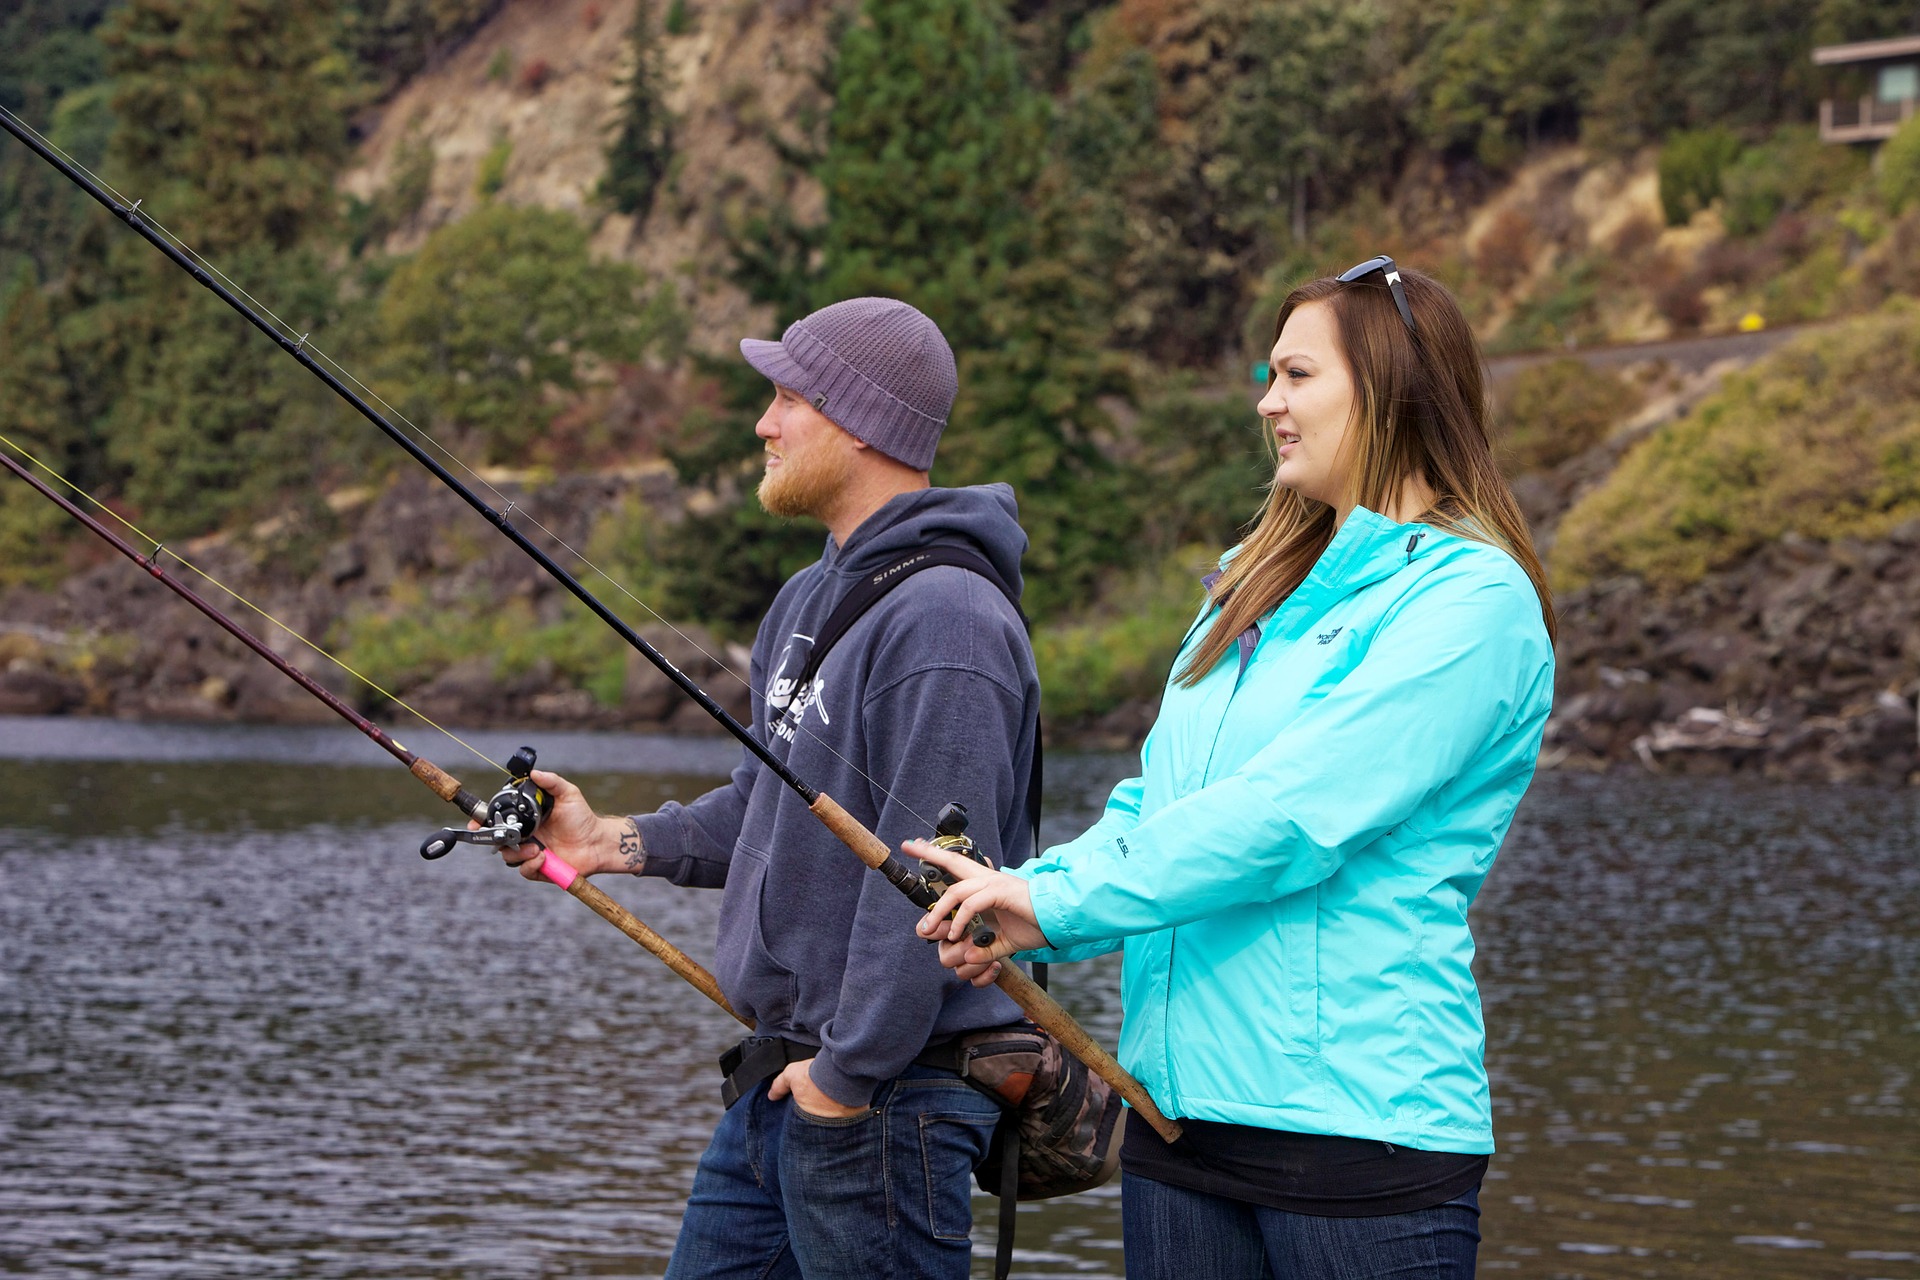 Hunting4Connections is a dating site for outdoor enthusiasts, including hunters and anglers.